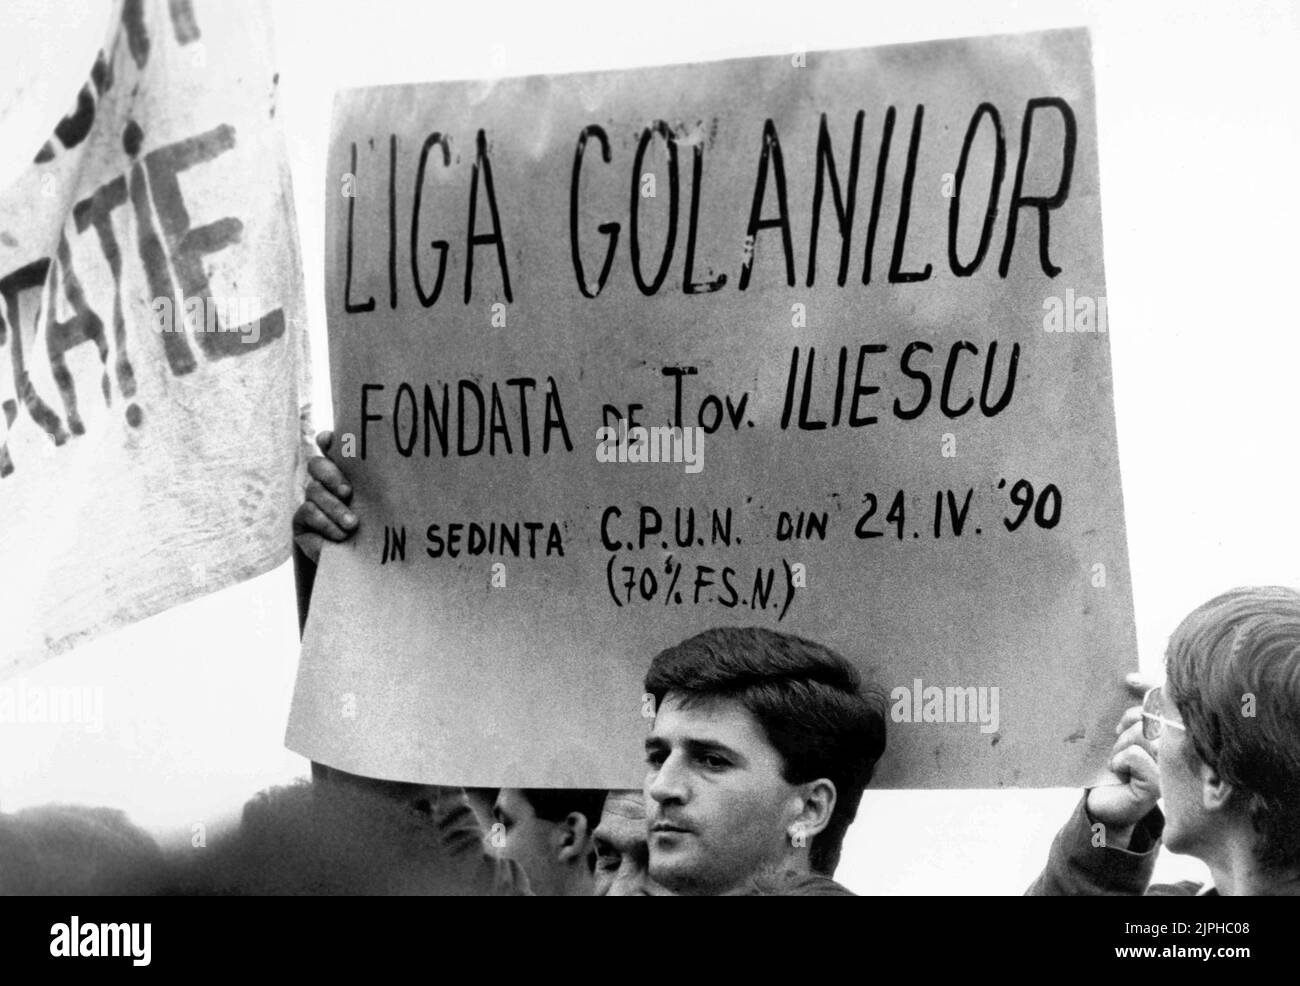 Bucharest, Romania, April 1990. 'Golaniada', a major anti-communism protest  in the University Square following the Romanian Revolution of 1989. People would gather daily to protest the ex-communists that grabbed the power after the Revolution. This banner says 'The Hooligans' League, founded by comrade Iliescu in April 24, 1990' Stock Photo